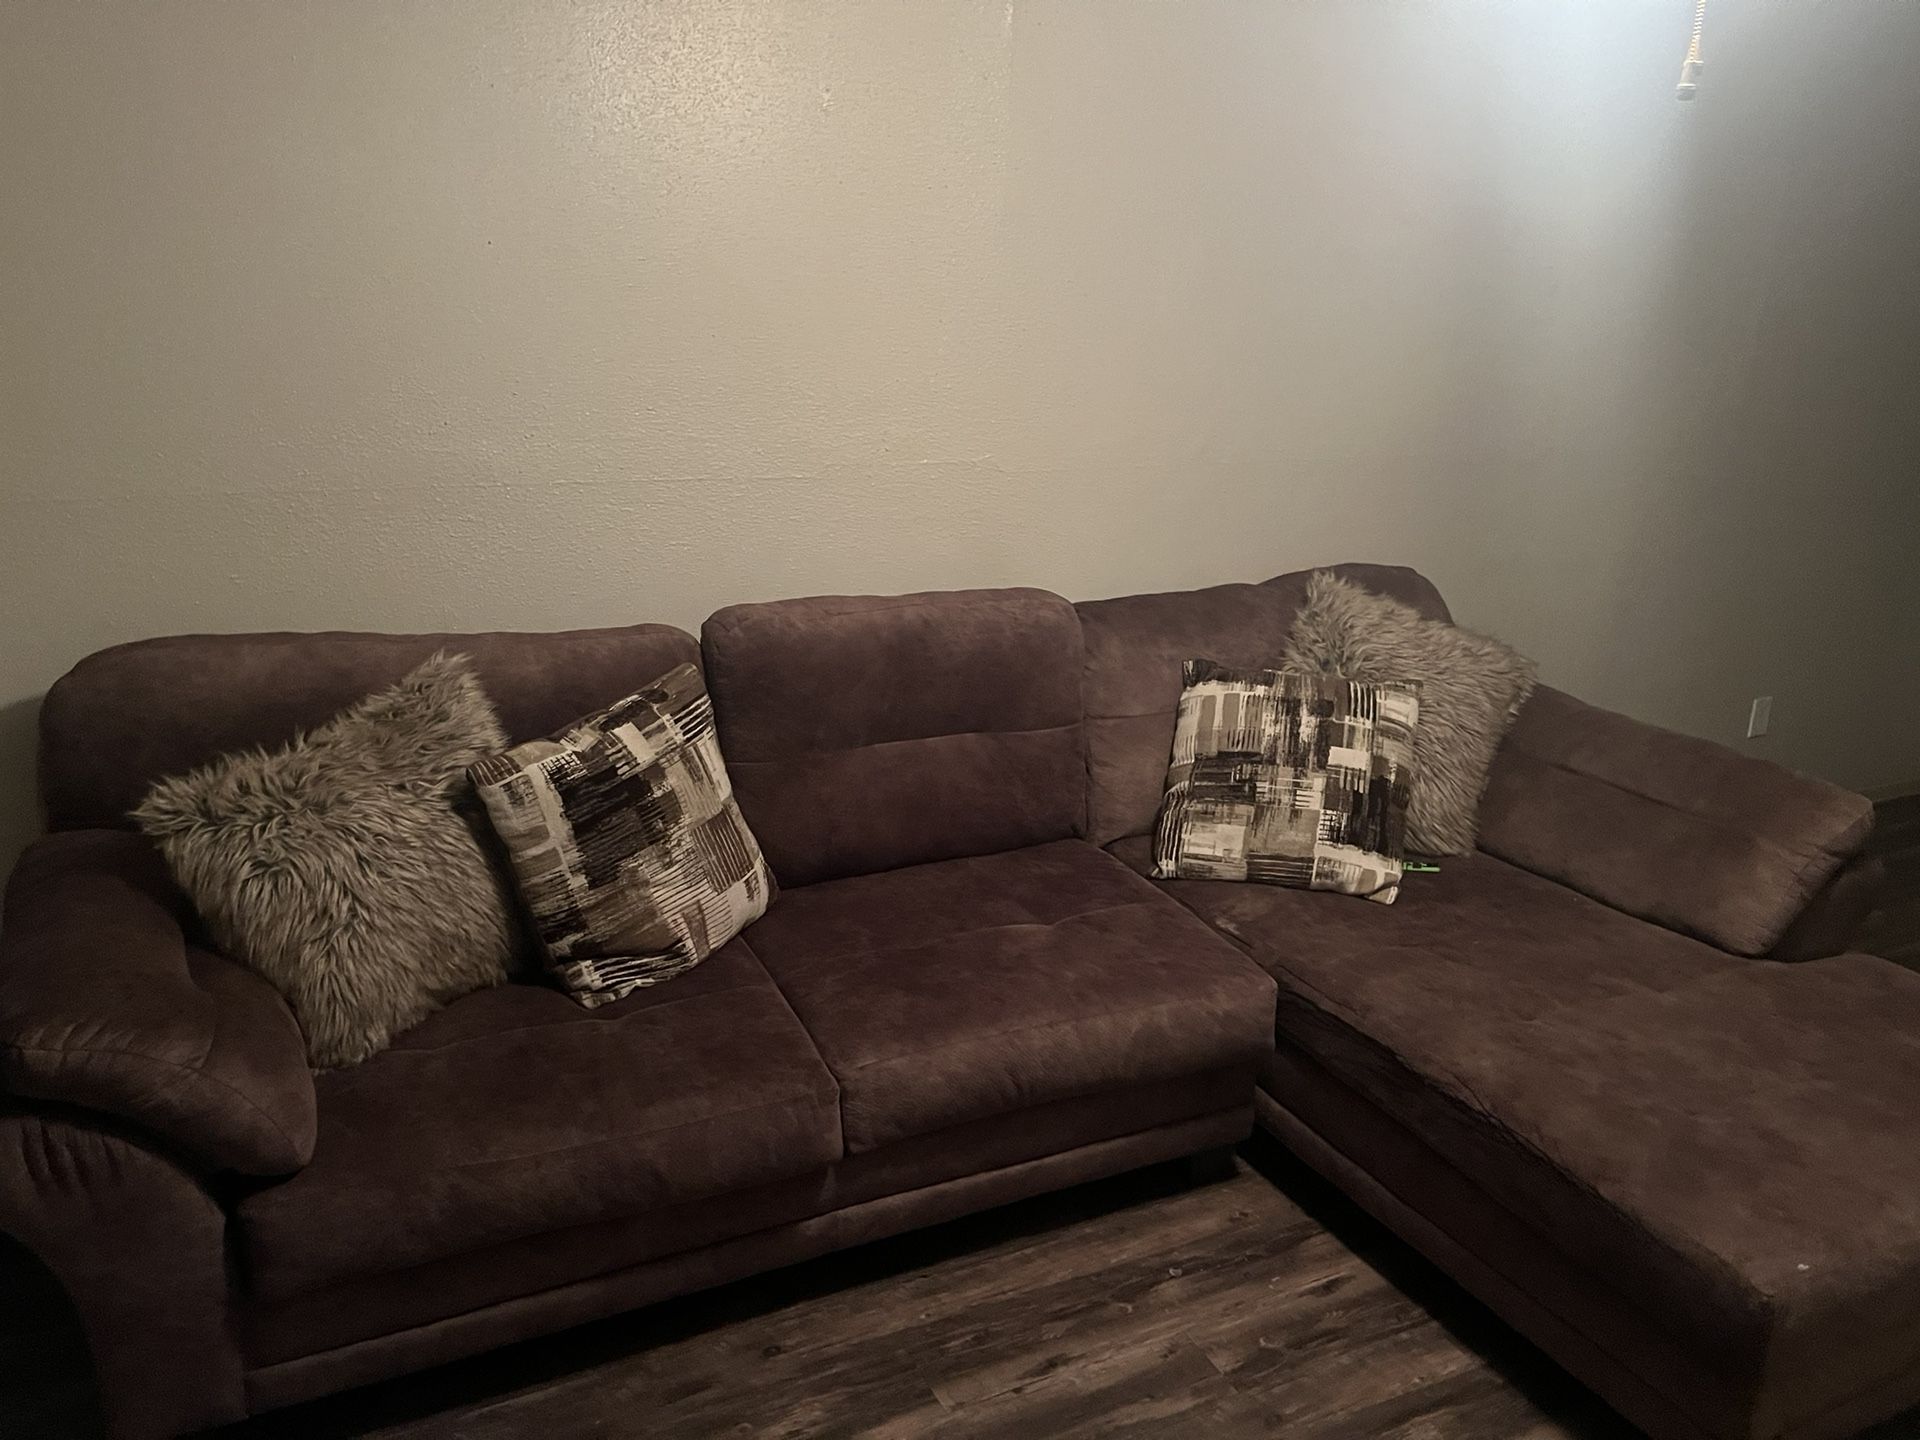 Couch Good Condition 